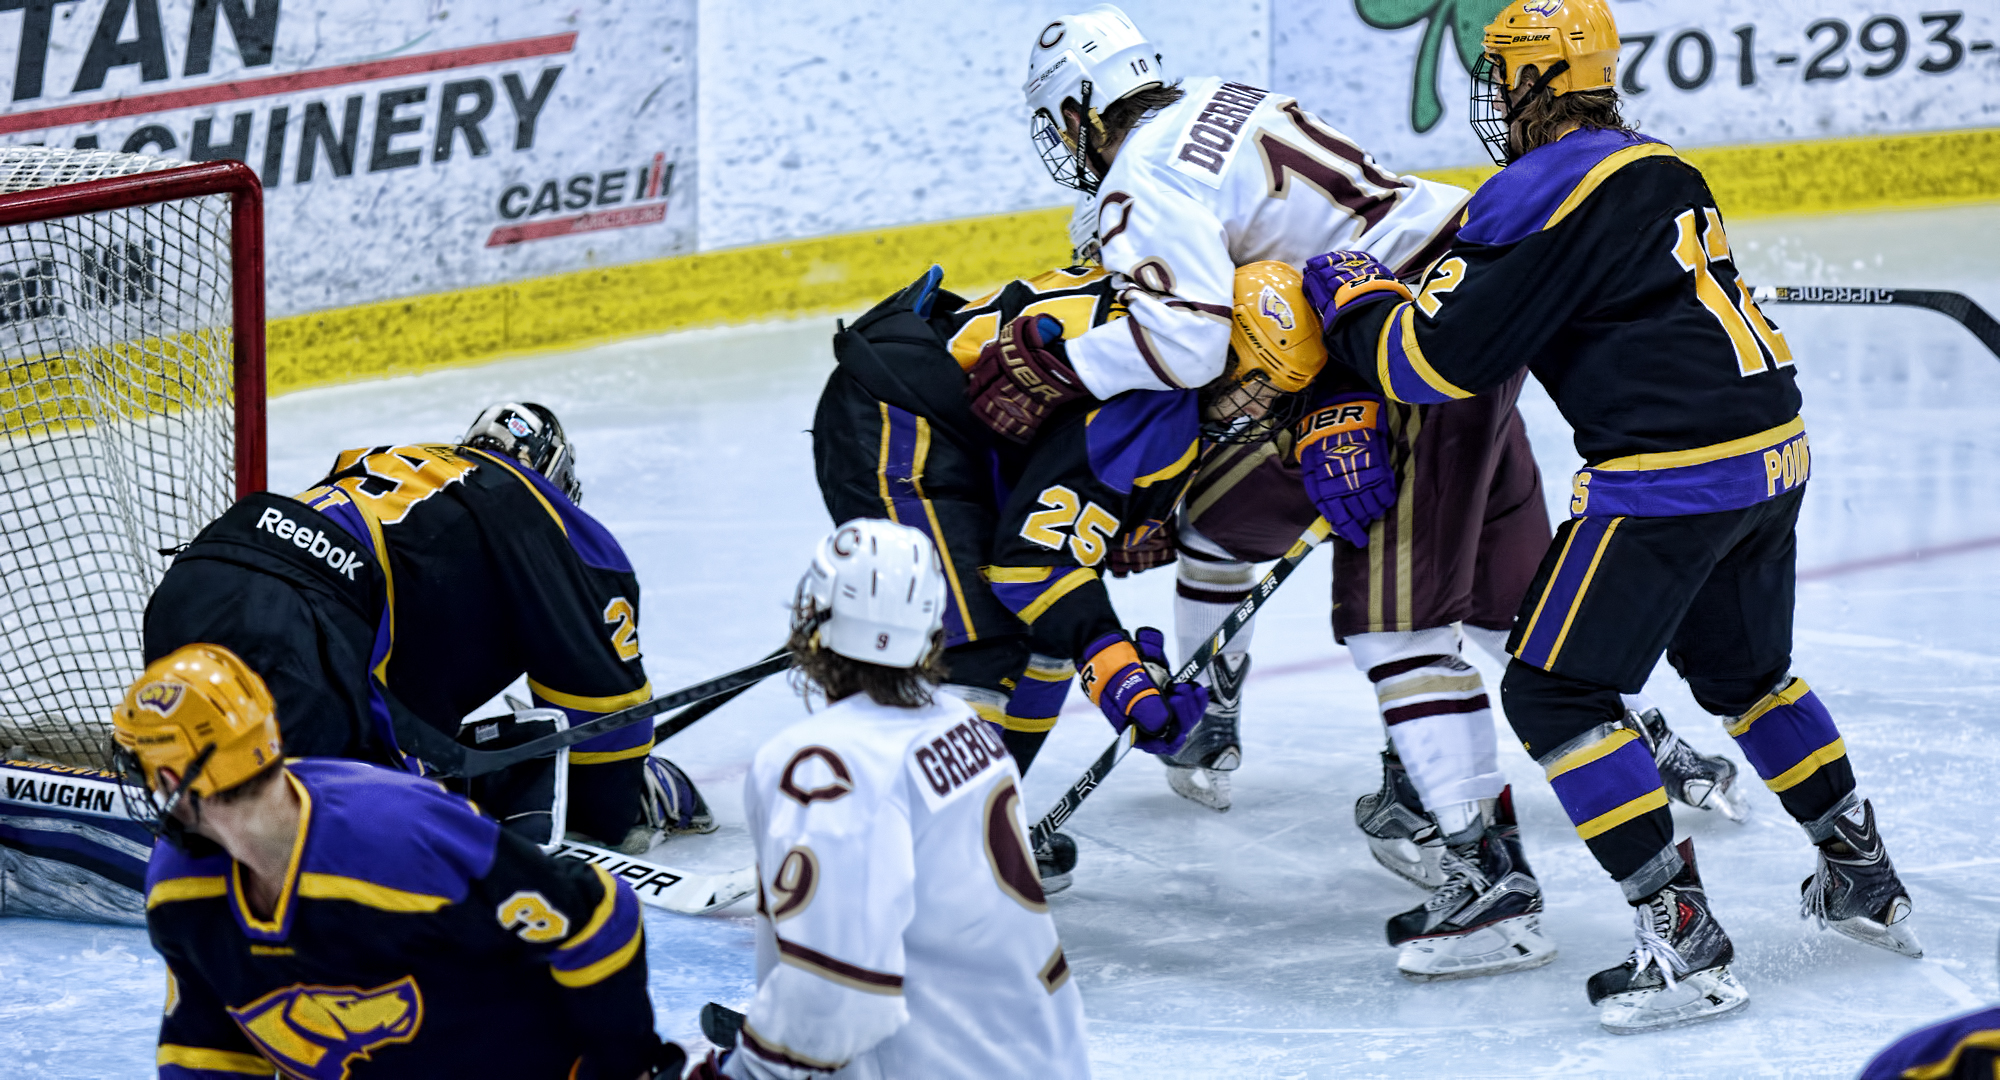 Zach Doerring (far) and Jon Grebosky each had a point in the Cobbers' thrilling 3-2 loss at No.5-ranked Wis.-Stevens Point.